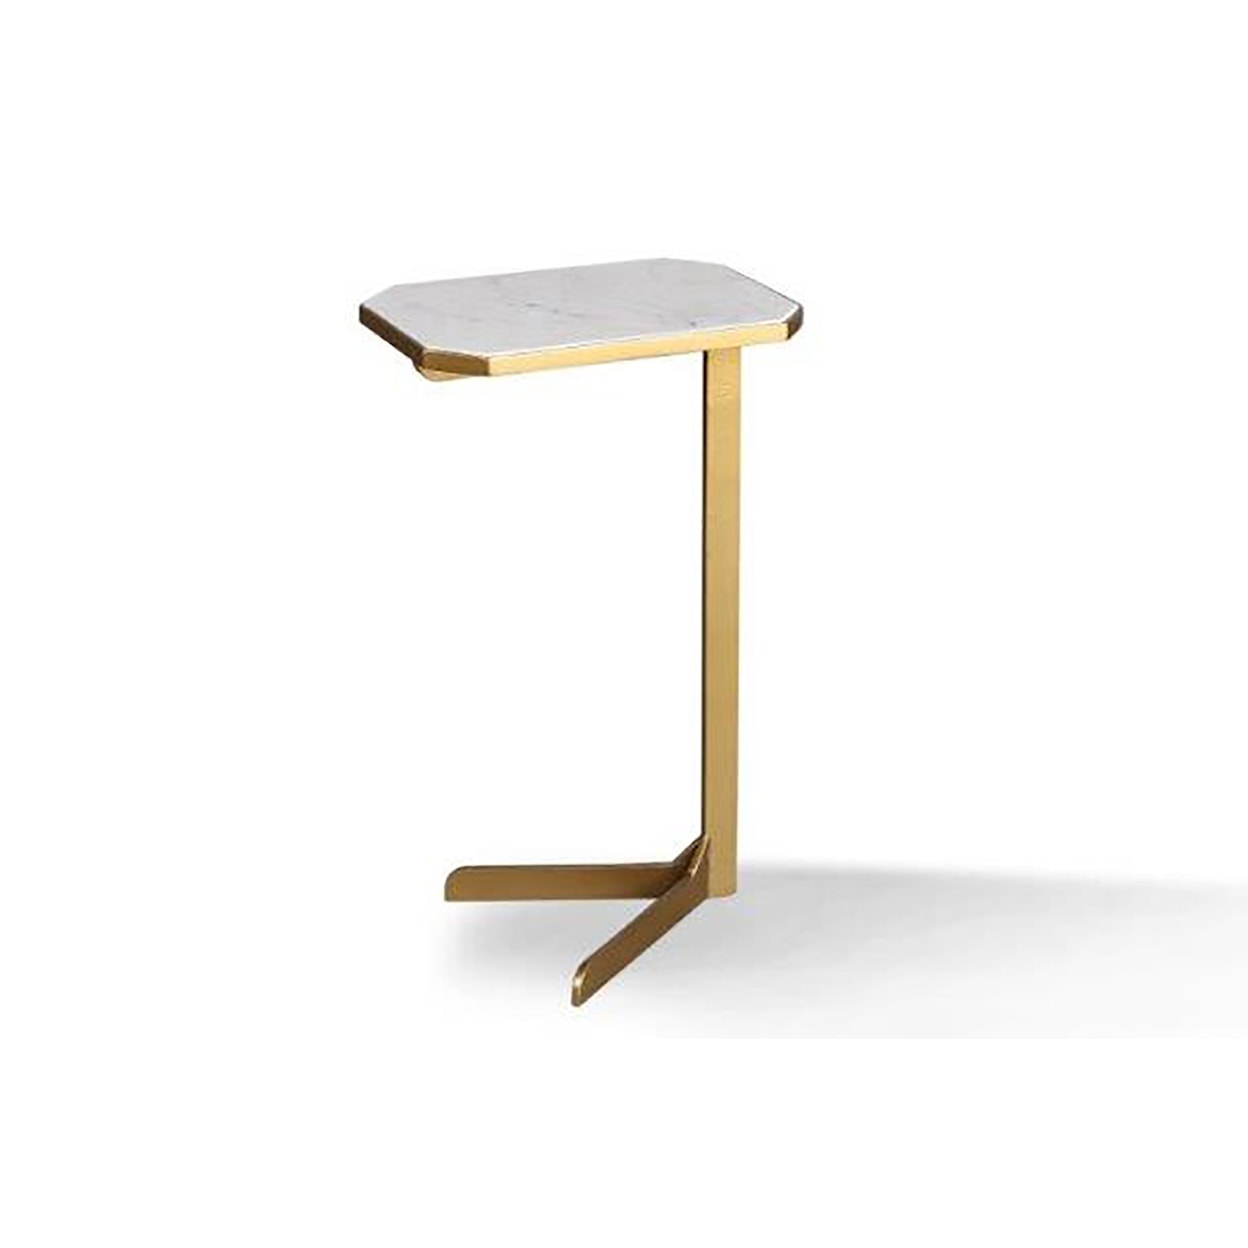 Paramount Furniture Crossings Eden Accent Table